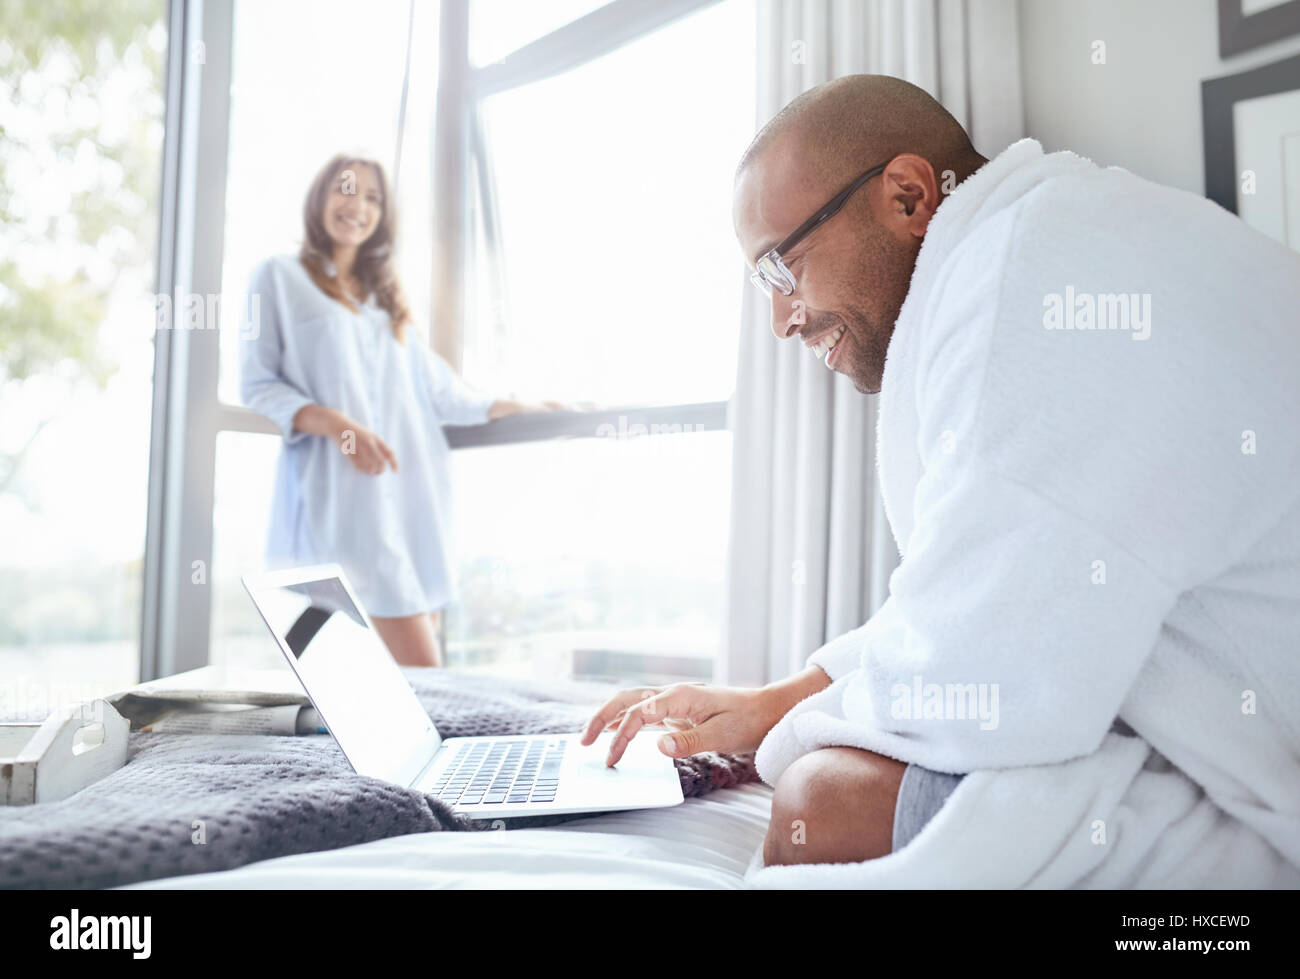 Smiling woman watching boyfriend in bathrobe reading laptop on bed Stock Photo